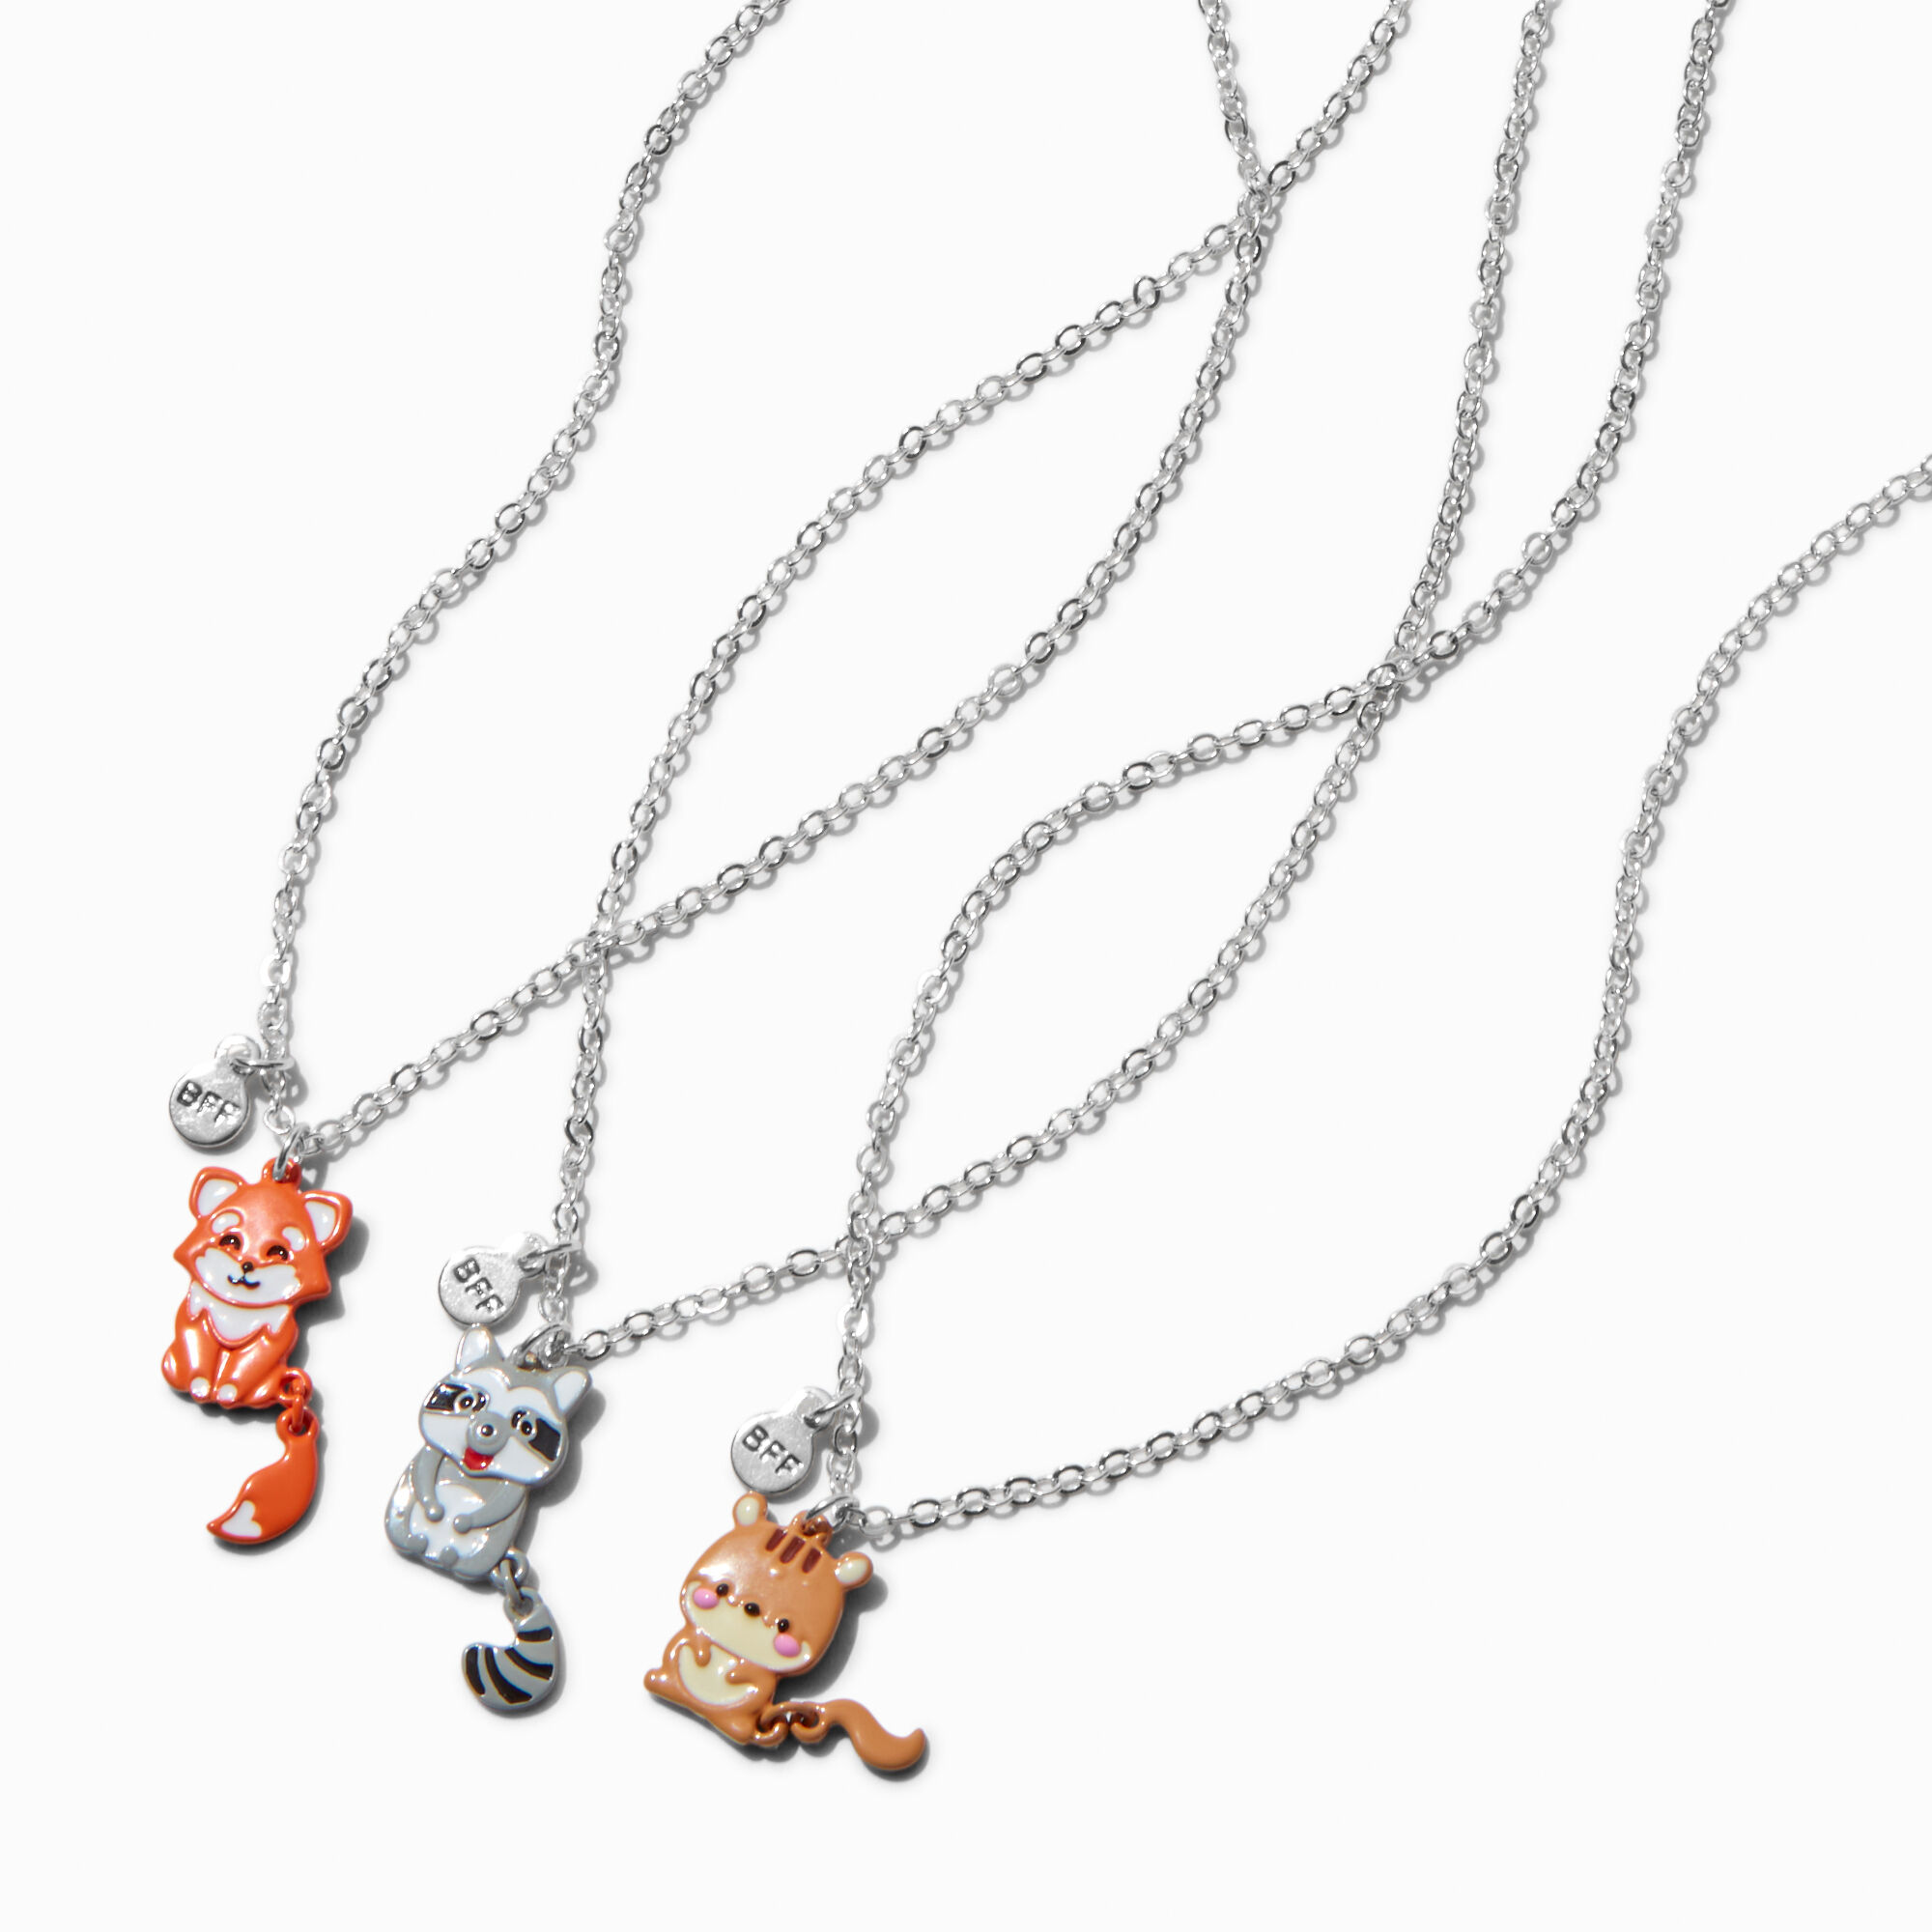 View Claires Best Friends Woodland Critters Pendant Necklaces 3 Pack Silver information